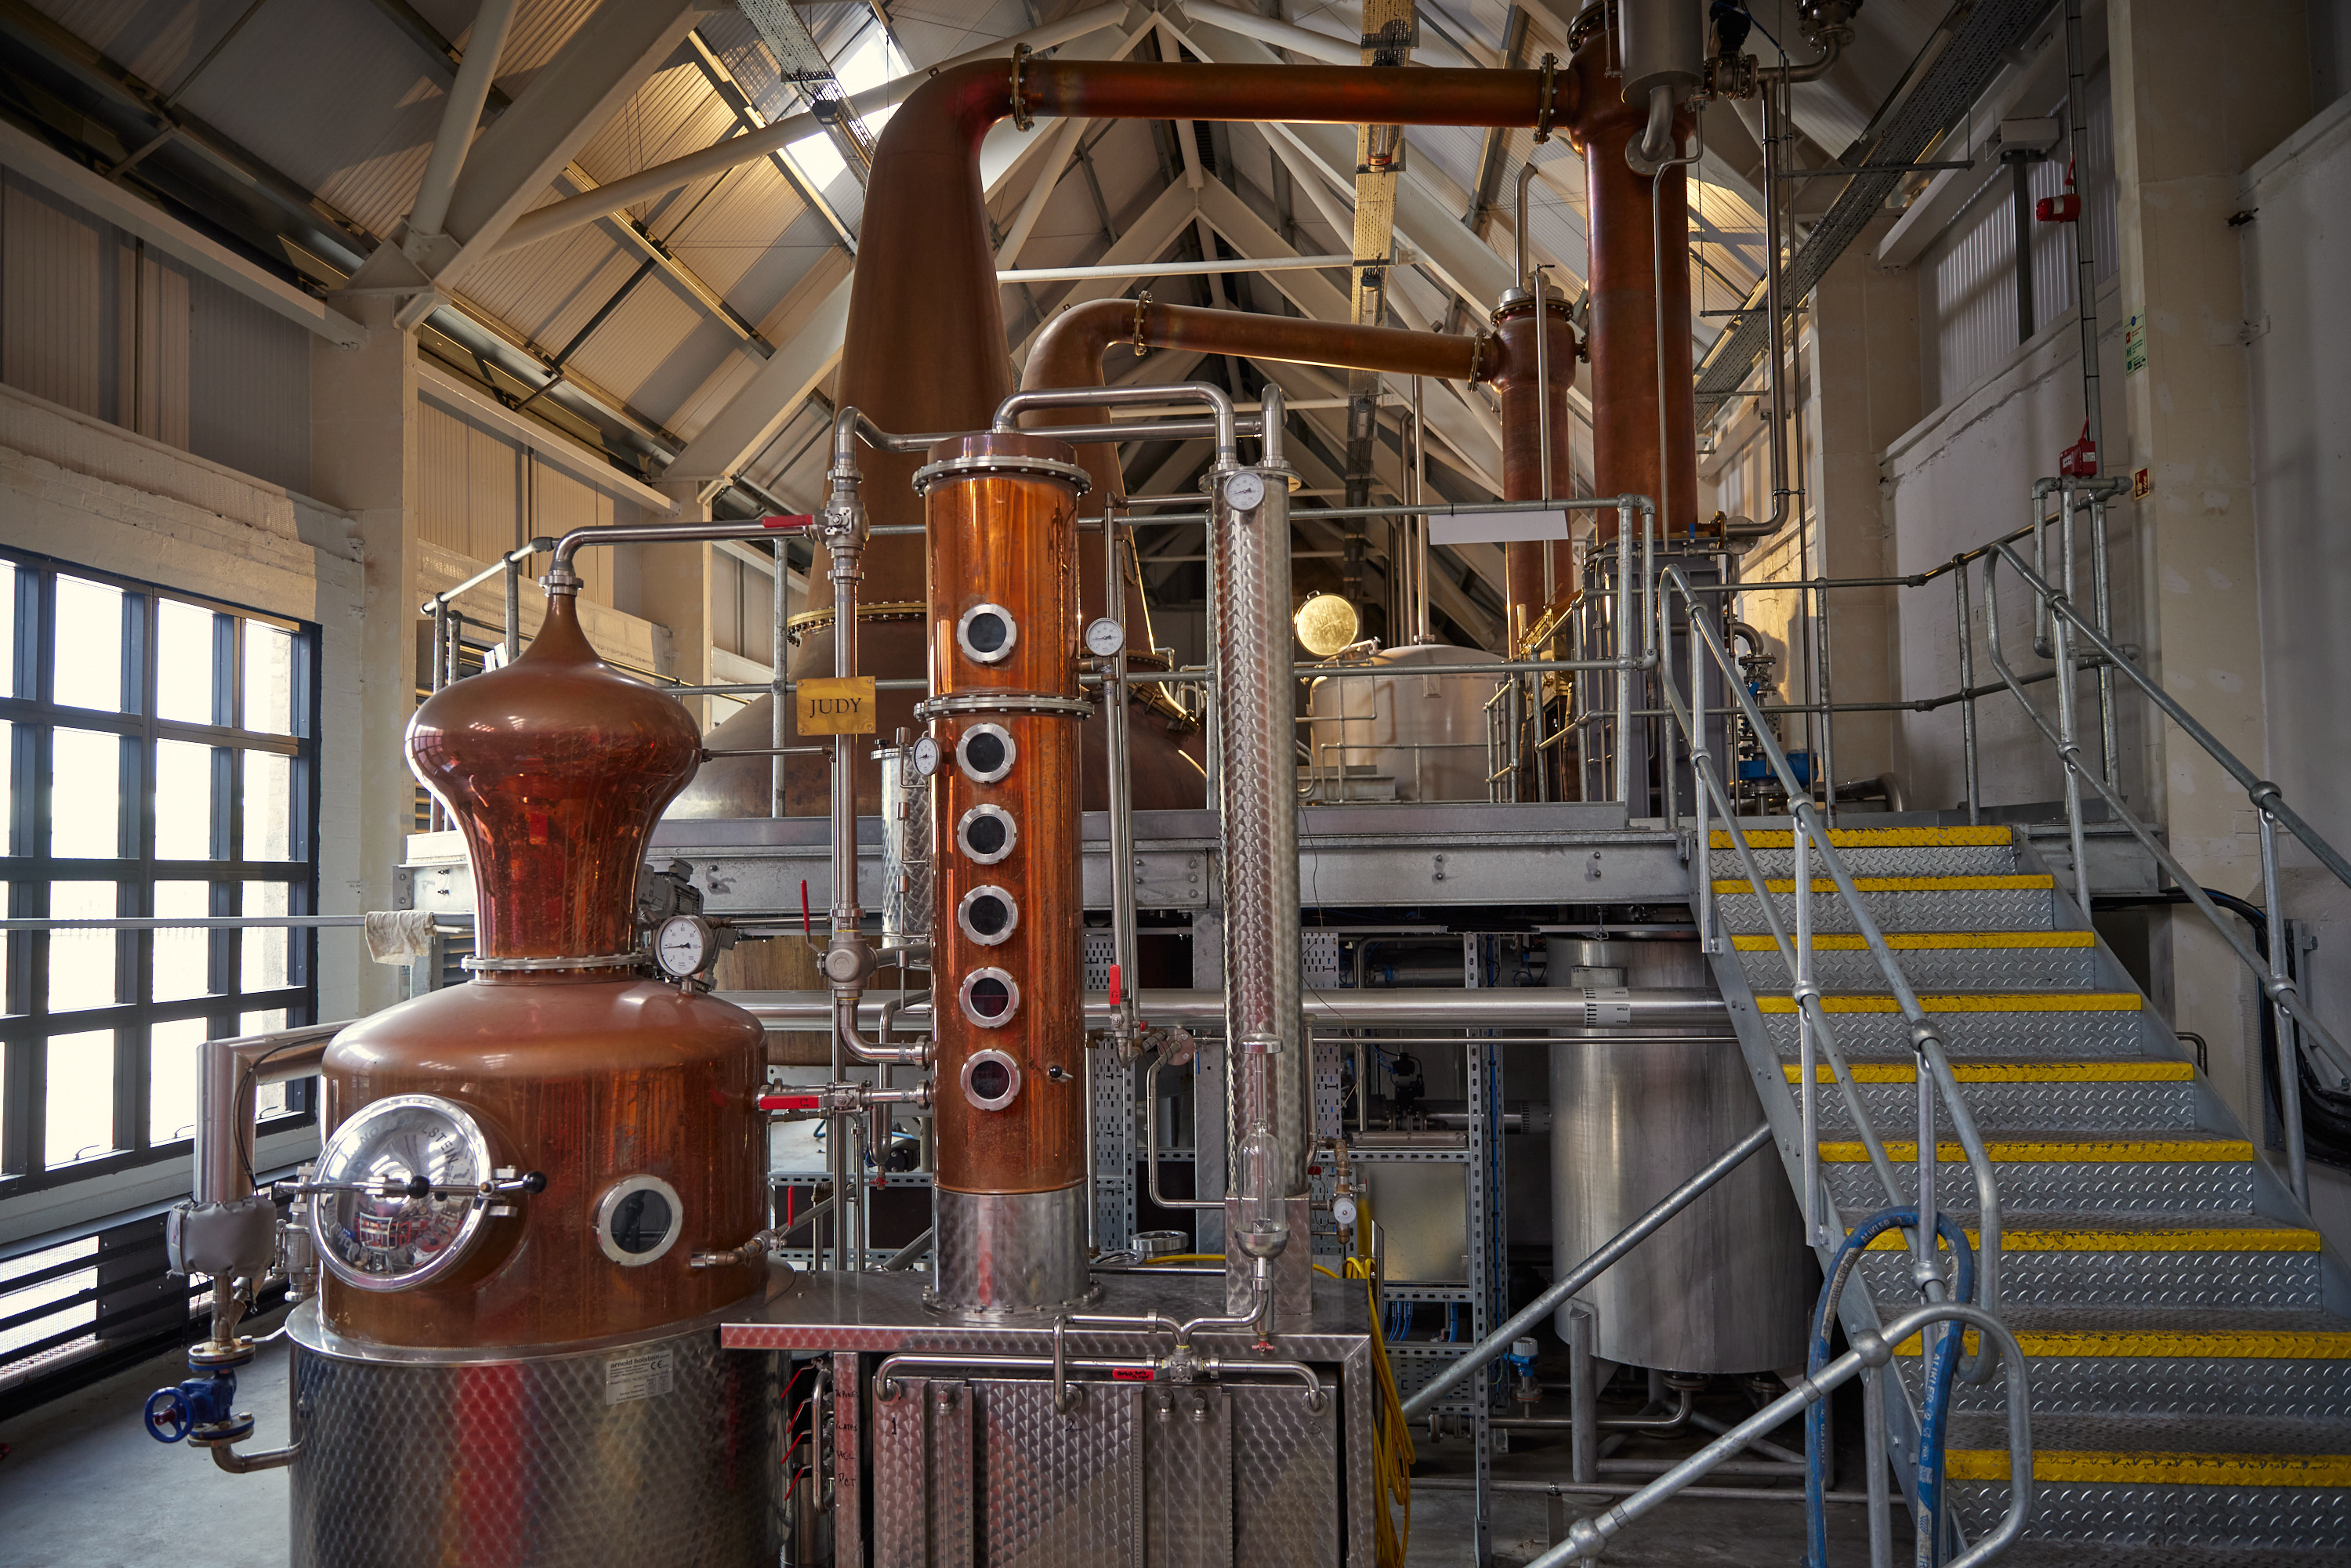 The new Bonnington distillery is looking shiny and ready to plunge into a competitive market